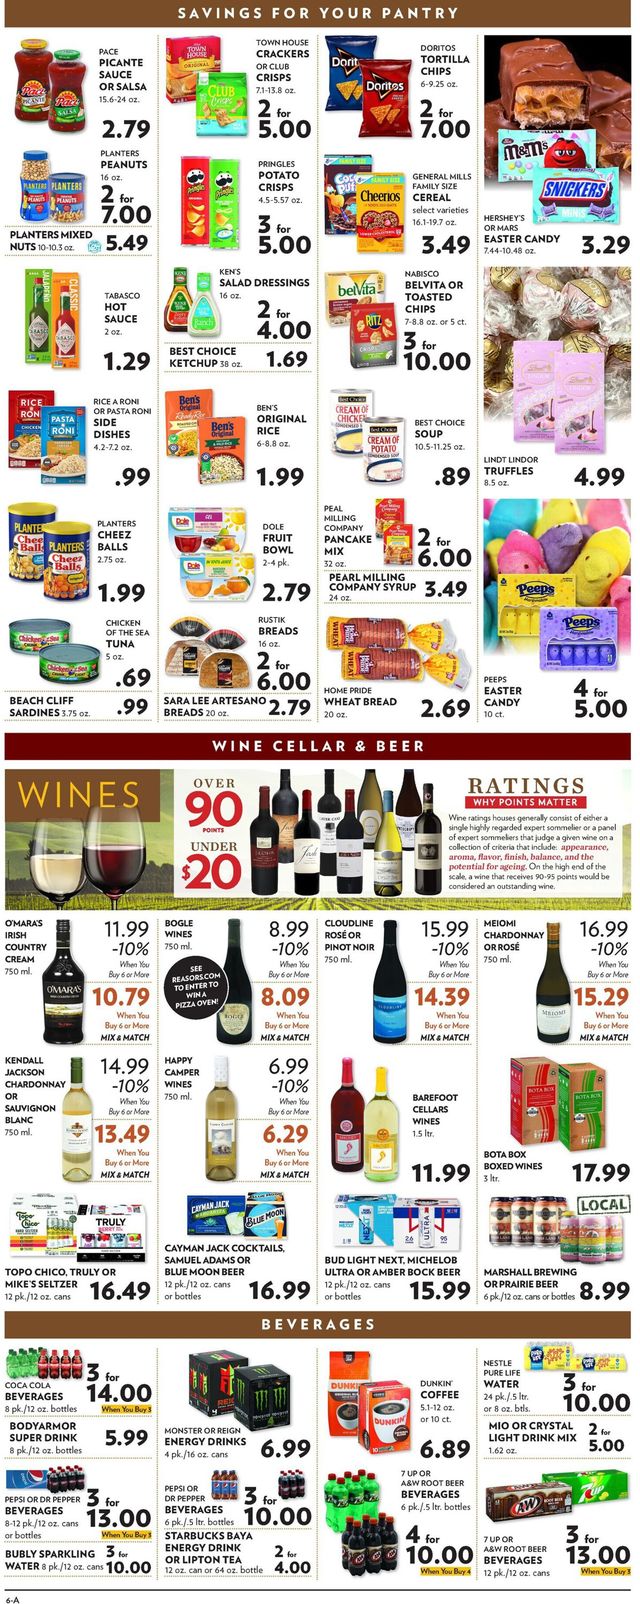 Reasor's Ad from 03/16/2022